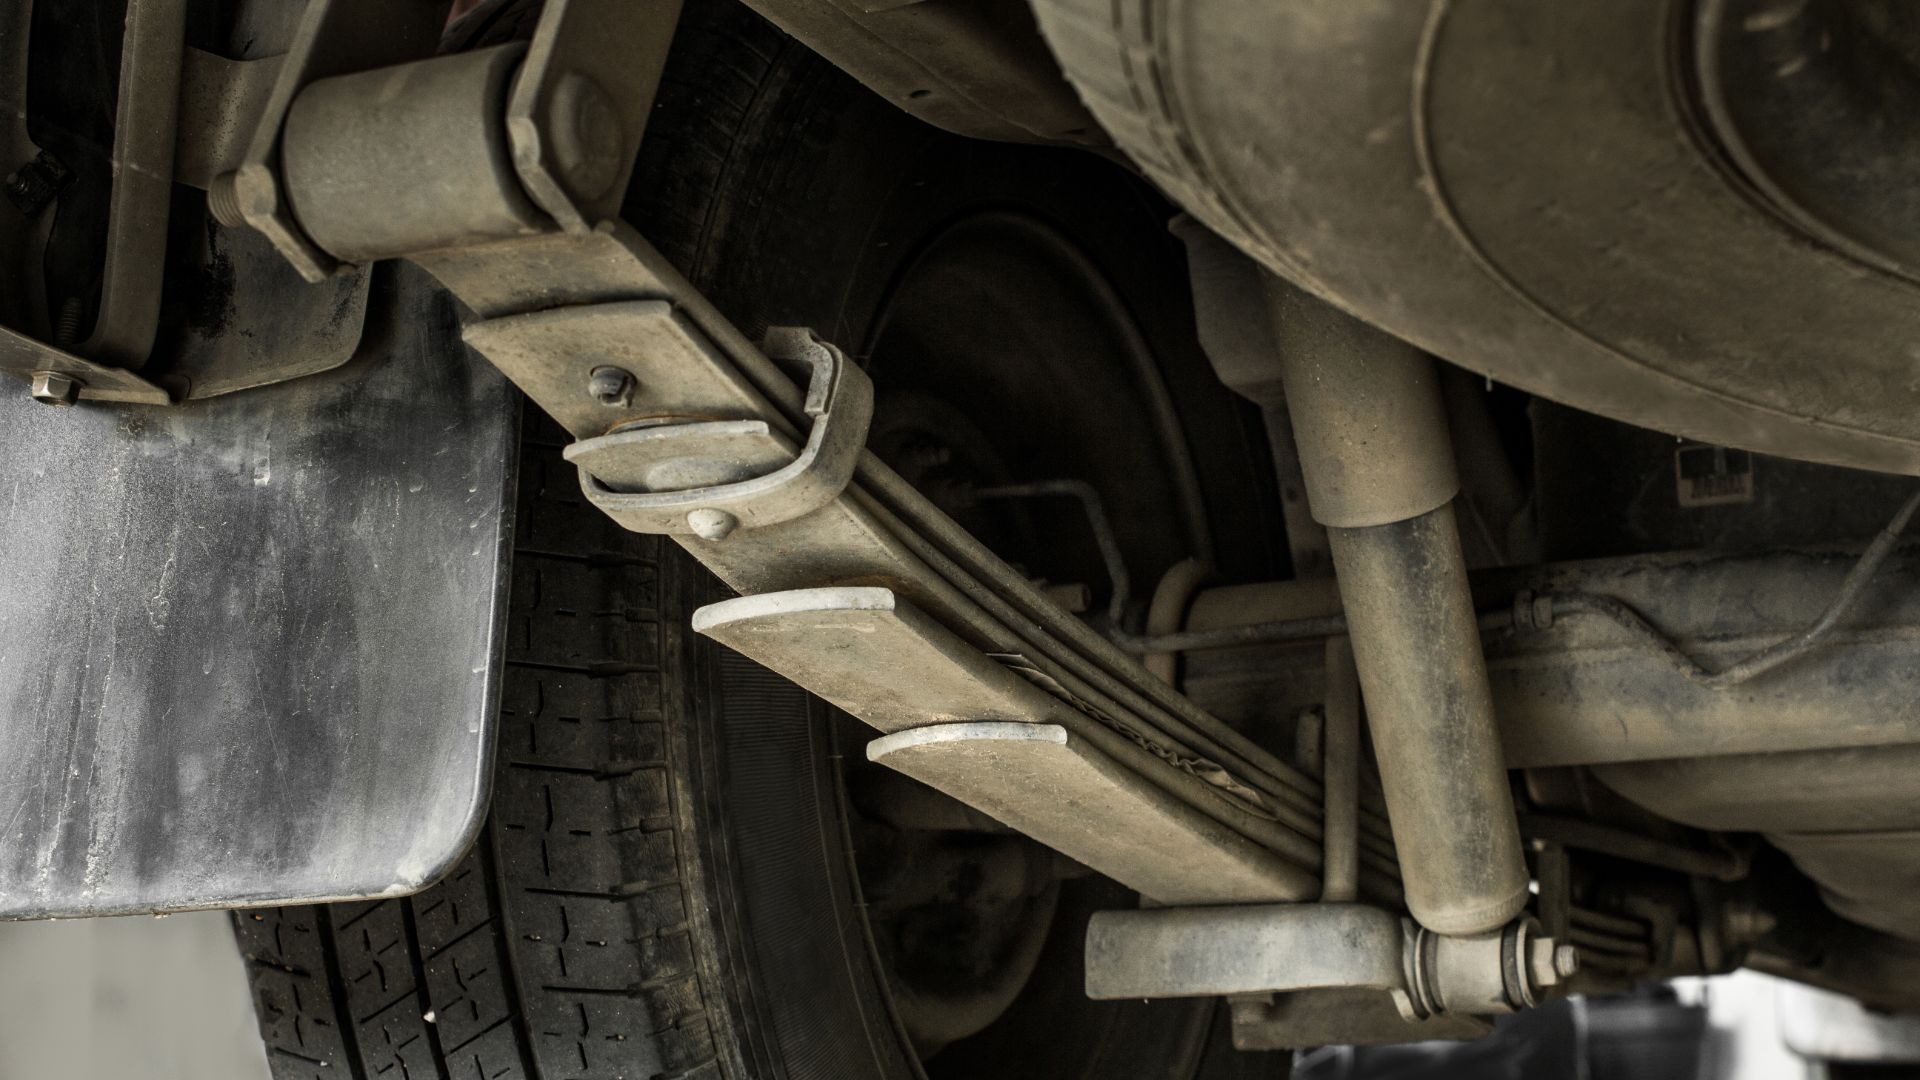 a close up of a car's exhaust system.